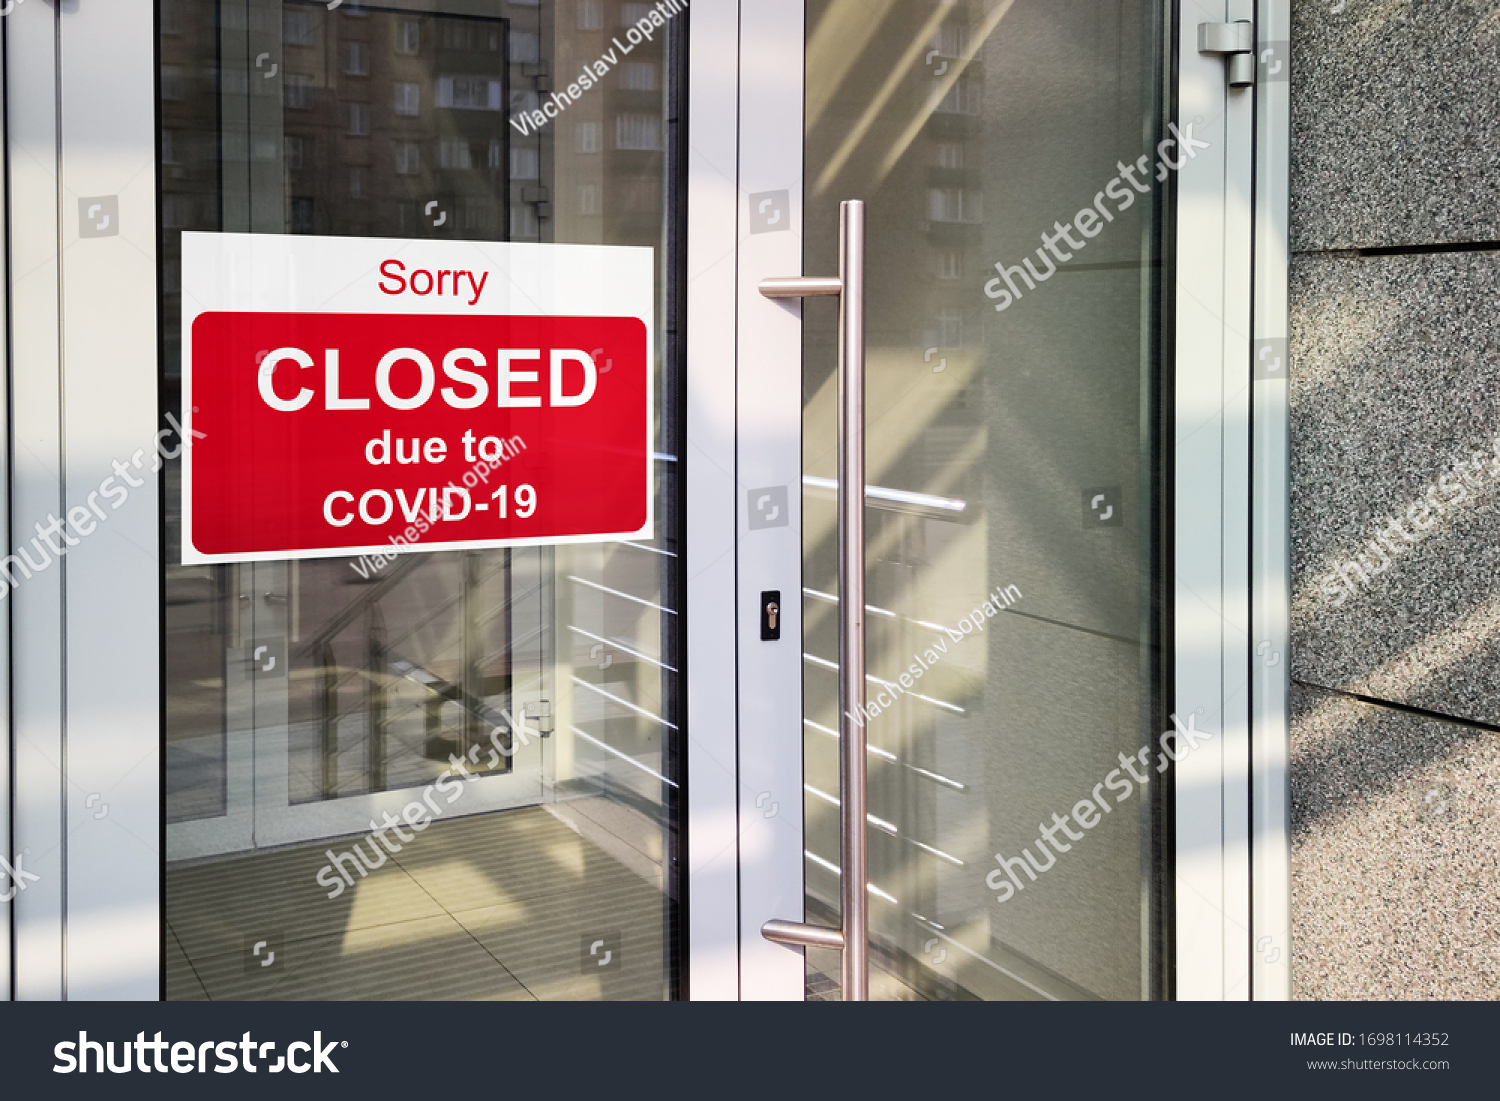 Business center closed due to COVID-19, sign with sorry in door. Stores, offices, other public places temporarily closed during coronavirus pandemic. Economy hit by corona virus. Lockdown concept. #1698114352